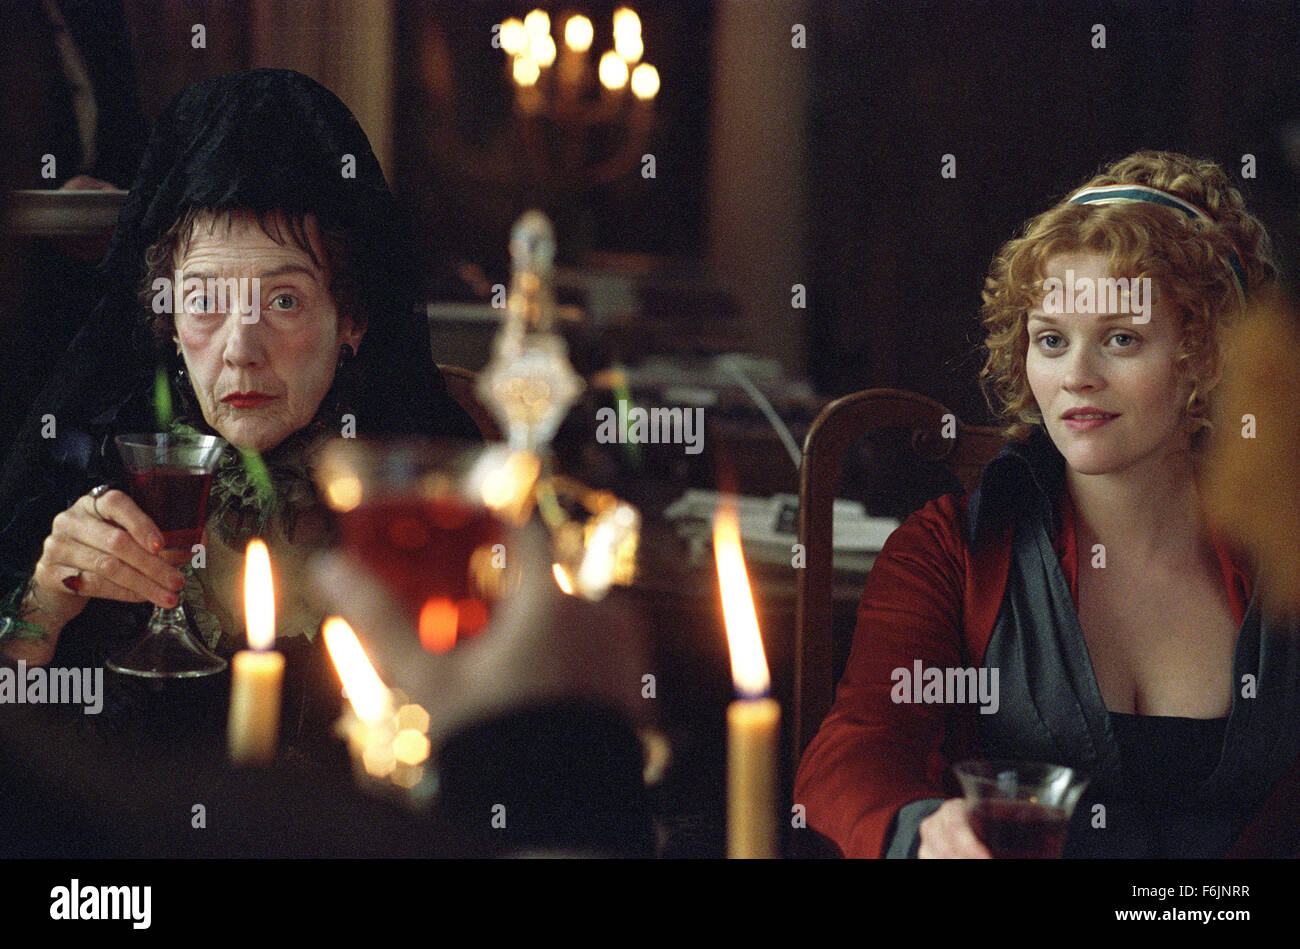 RELEASE DATE: September 1, 2004. MOVIE TITLE: Vanity Fair. STUDIO: Focus Features. PLOT: Growing up poor in London, Becky Sharp (Witherspoon) defies her poverty-stricken background and ascends the social ladder alongside her best friend, Amelia. PICTURED: EILEEN ATKINS and RESSE WITHERSPOON star as Miss Matilda Crawley and Becky Sharp. Stock Photo